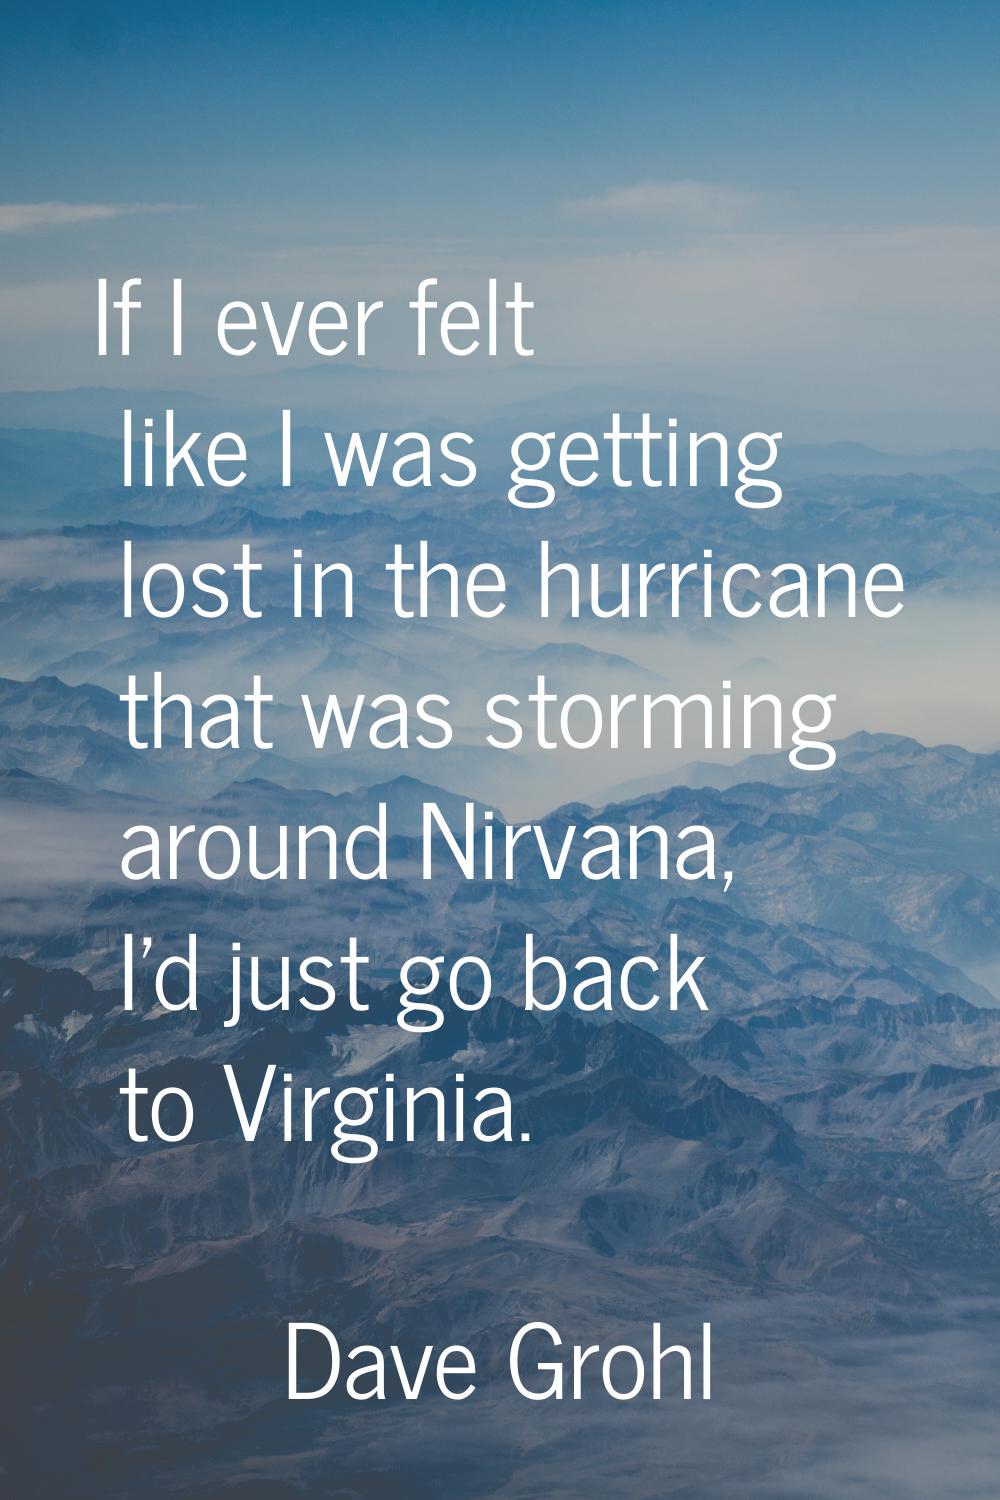 If I ever felt like I was getting lost in the hurricane that was storming around Nirvana, I'd just 